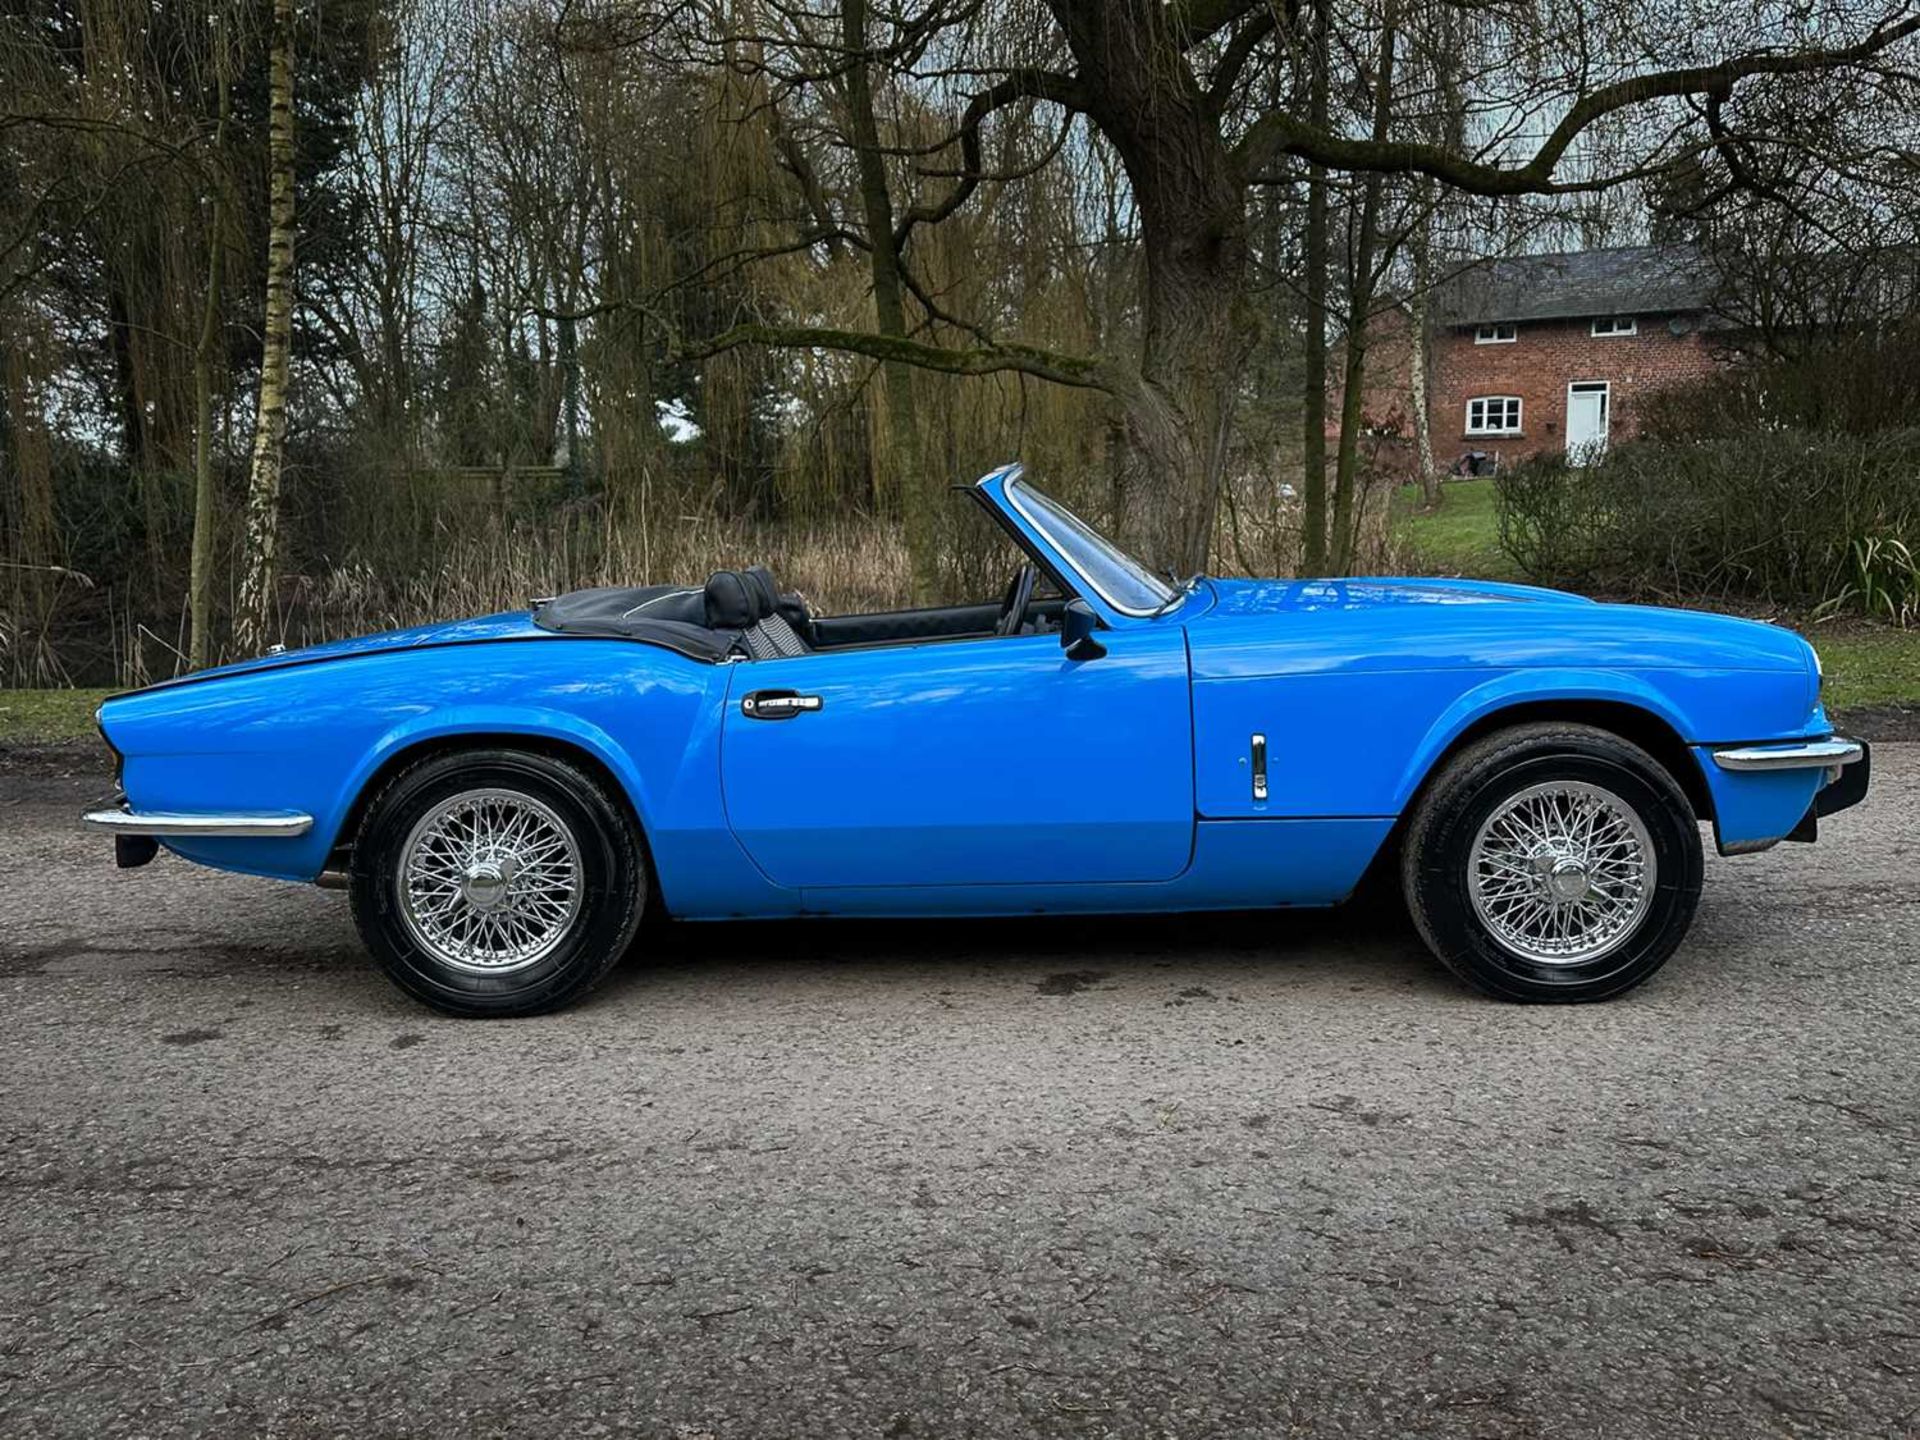 1981 Triumph Spitfire 1500 Comes with original bill of sale - Image 7 of 96